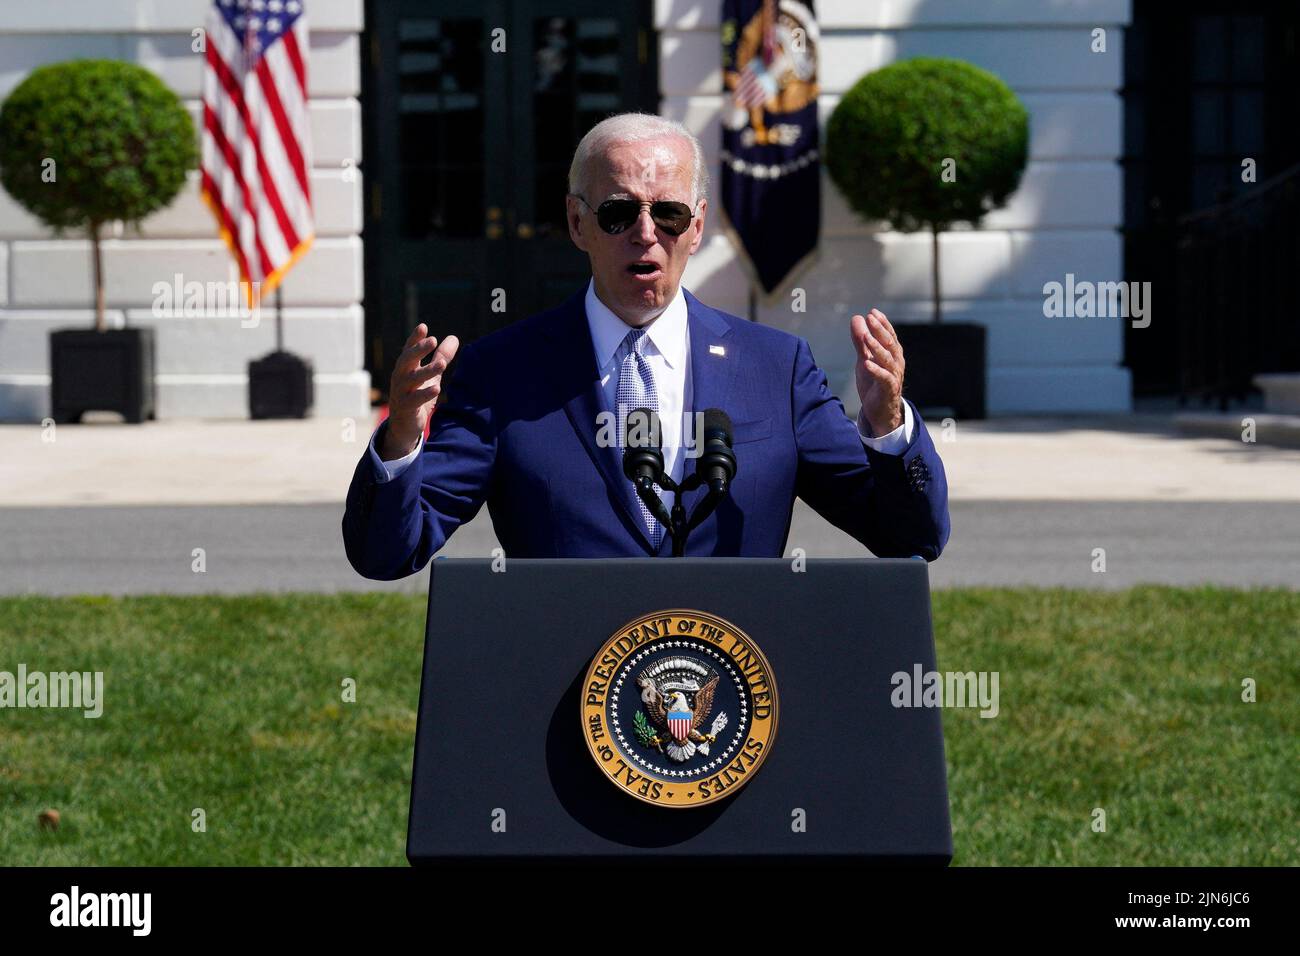 U.S. President Joe Biden delivers remarks and sign into law the CHIPS and Science Act during a ceremony on the South Lawn of the White House in Washington on August 9, 2022. Photo by Yuri Gripas/ABACAPRESS.COM Stock Photo